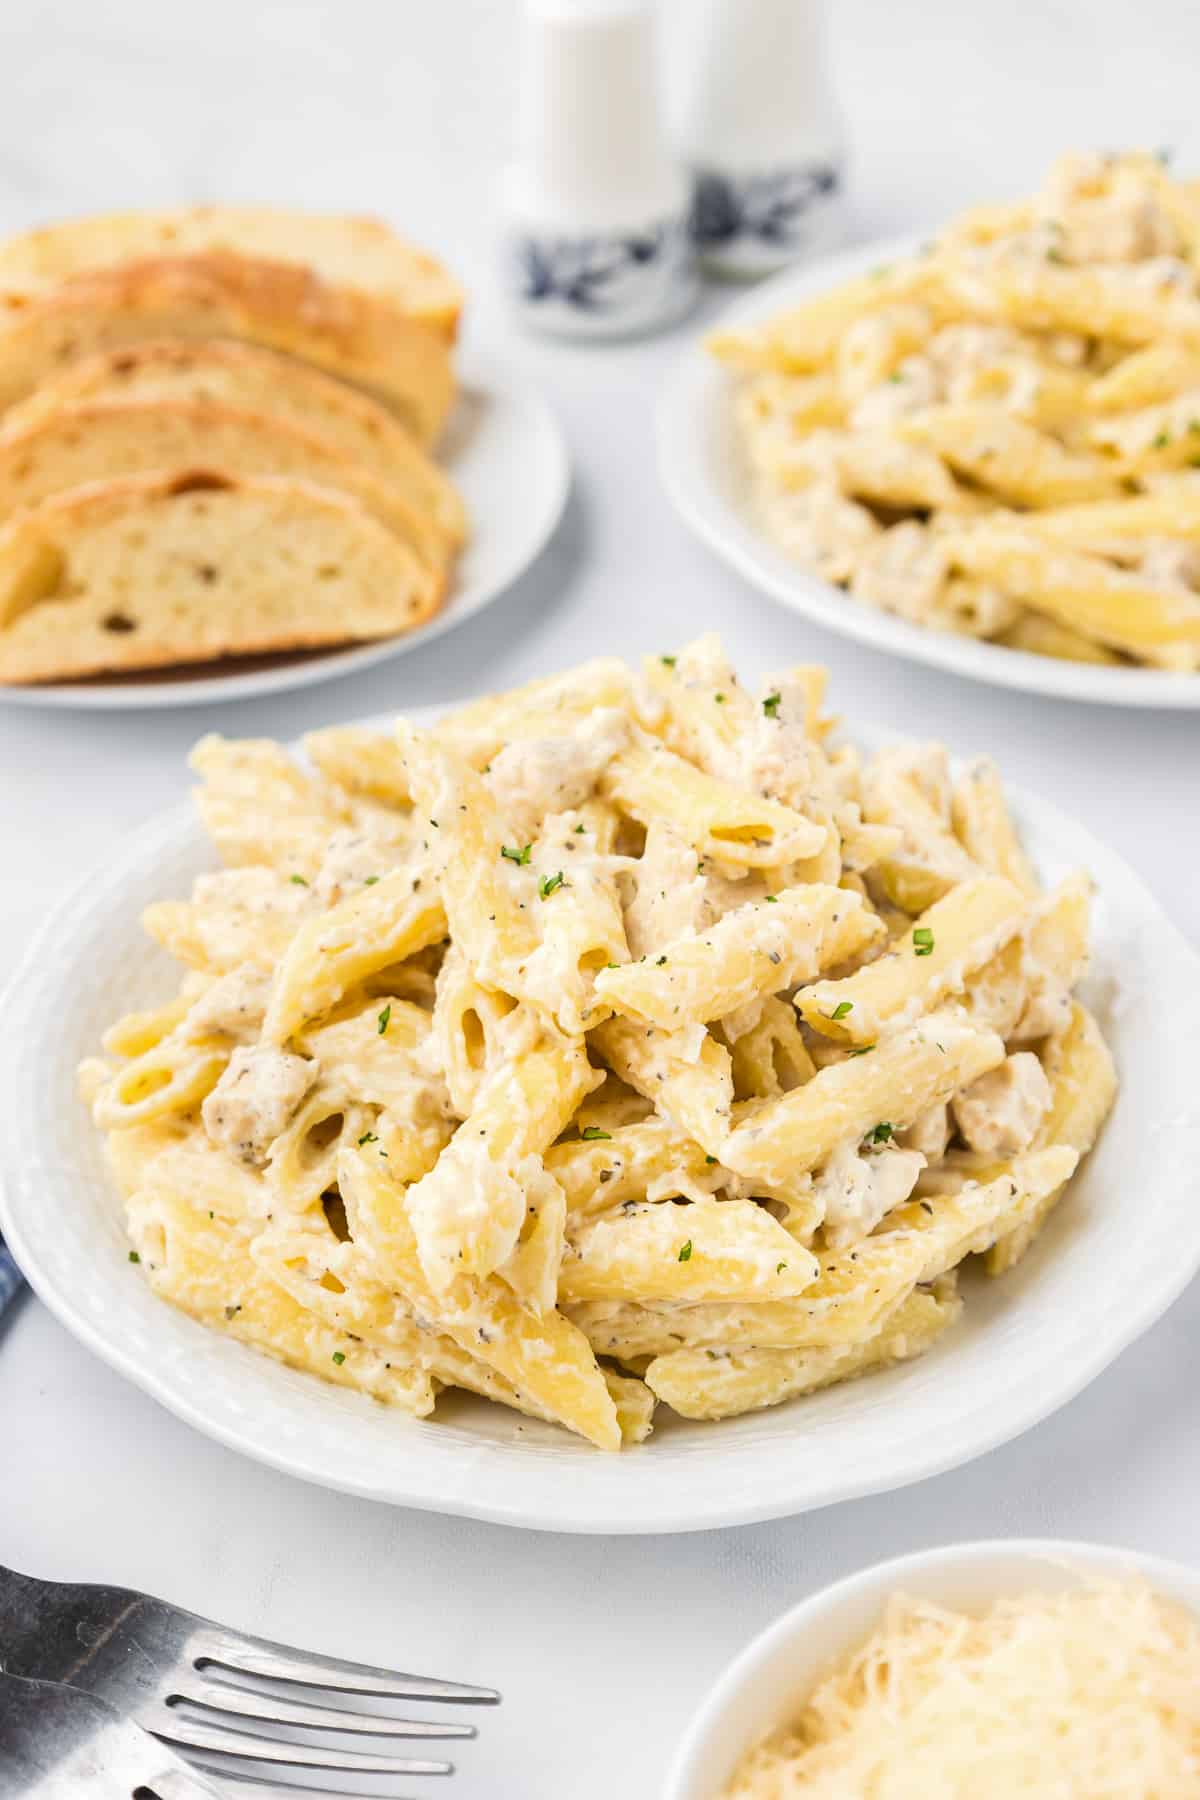 Chicken penne alfredo piled on a plate with bread and more pasta on plates in the background on the table.